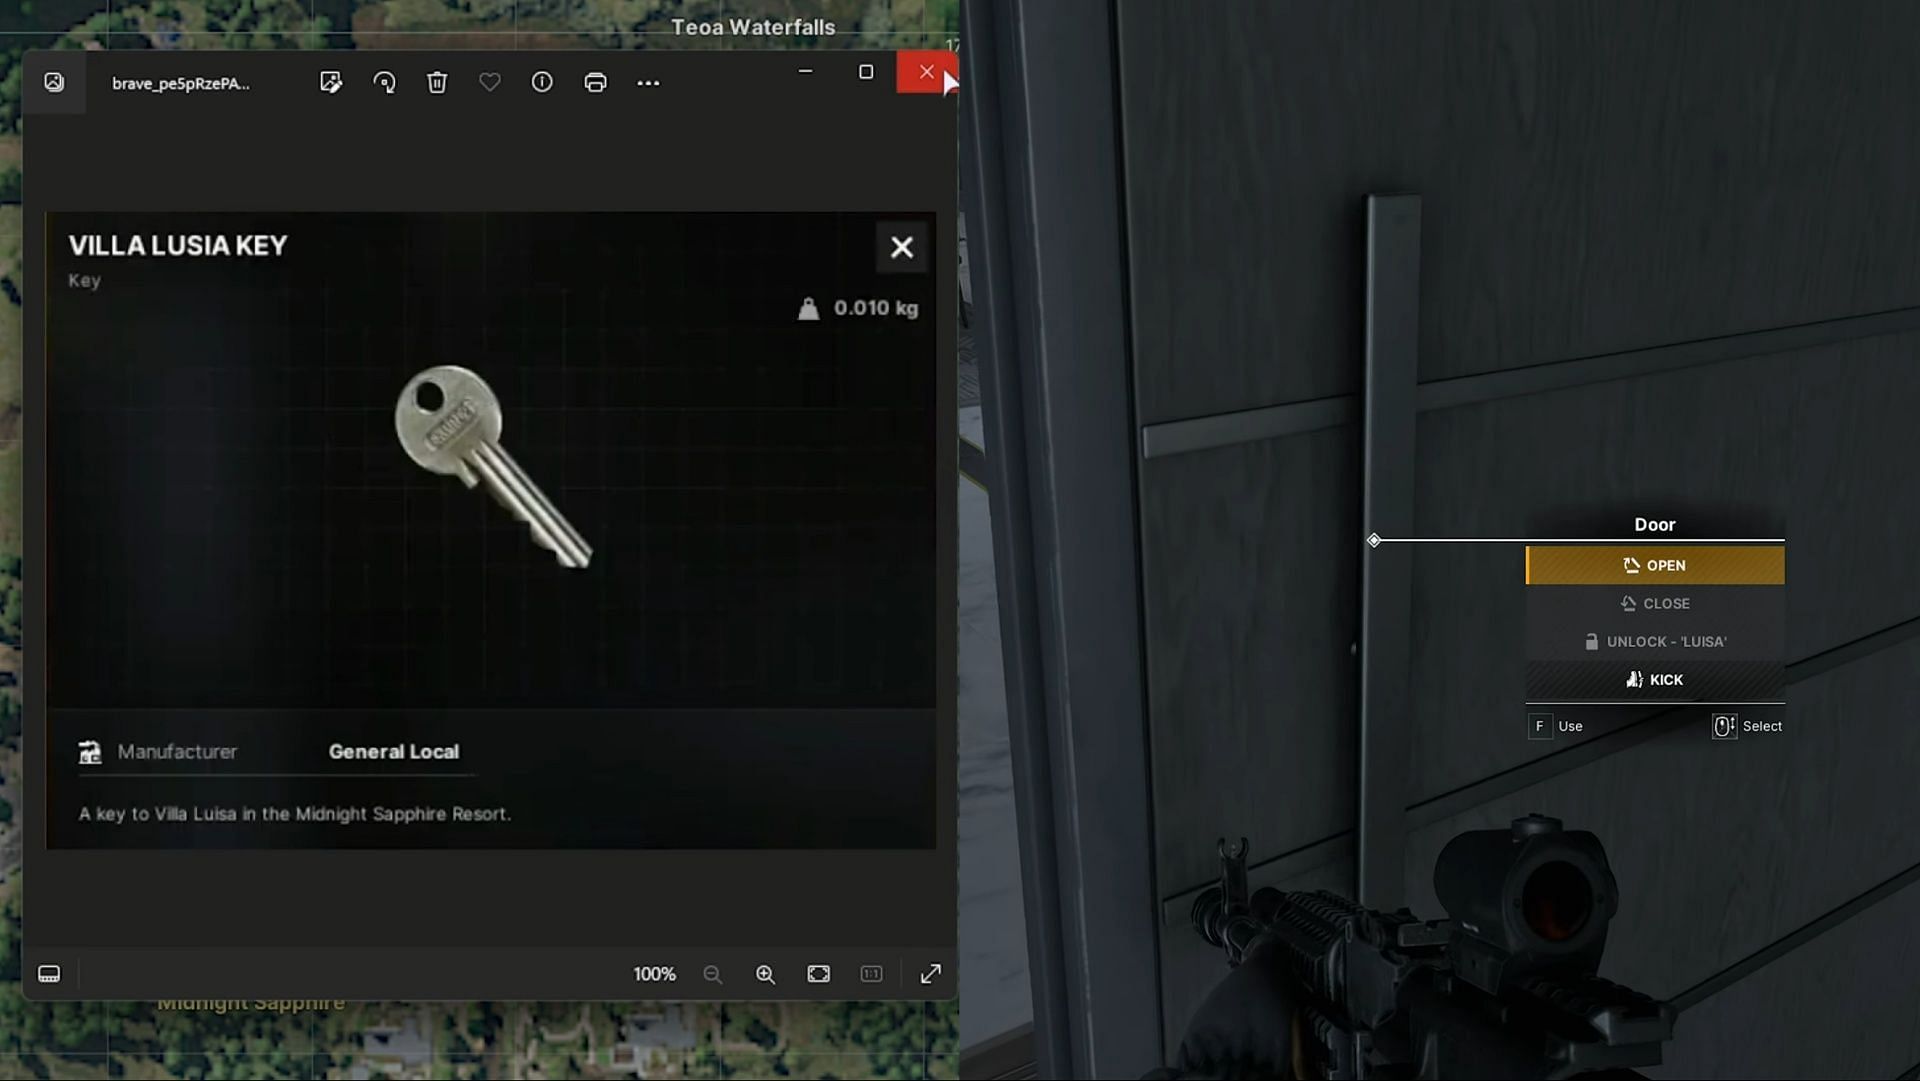 The Villa Lusia Key is required to unlock the Villa door (Image via MADFINGER Gamer|| YouTube/TroubleChute Basics)